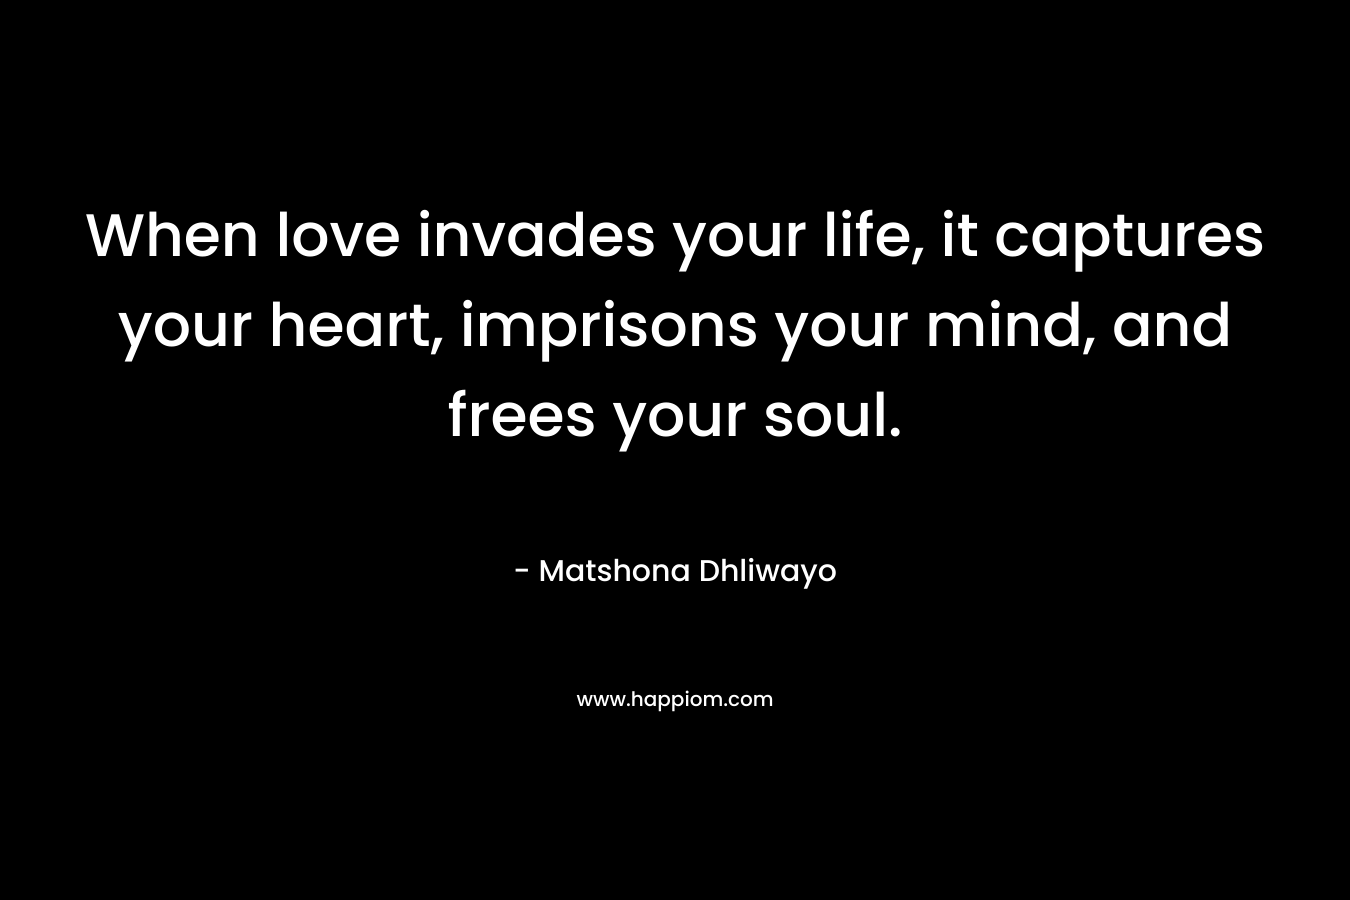 When love invades your life, it captures your heart, imprisons your mind, and frees your soul.